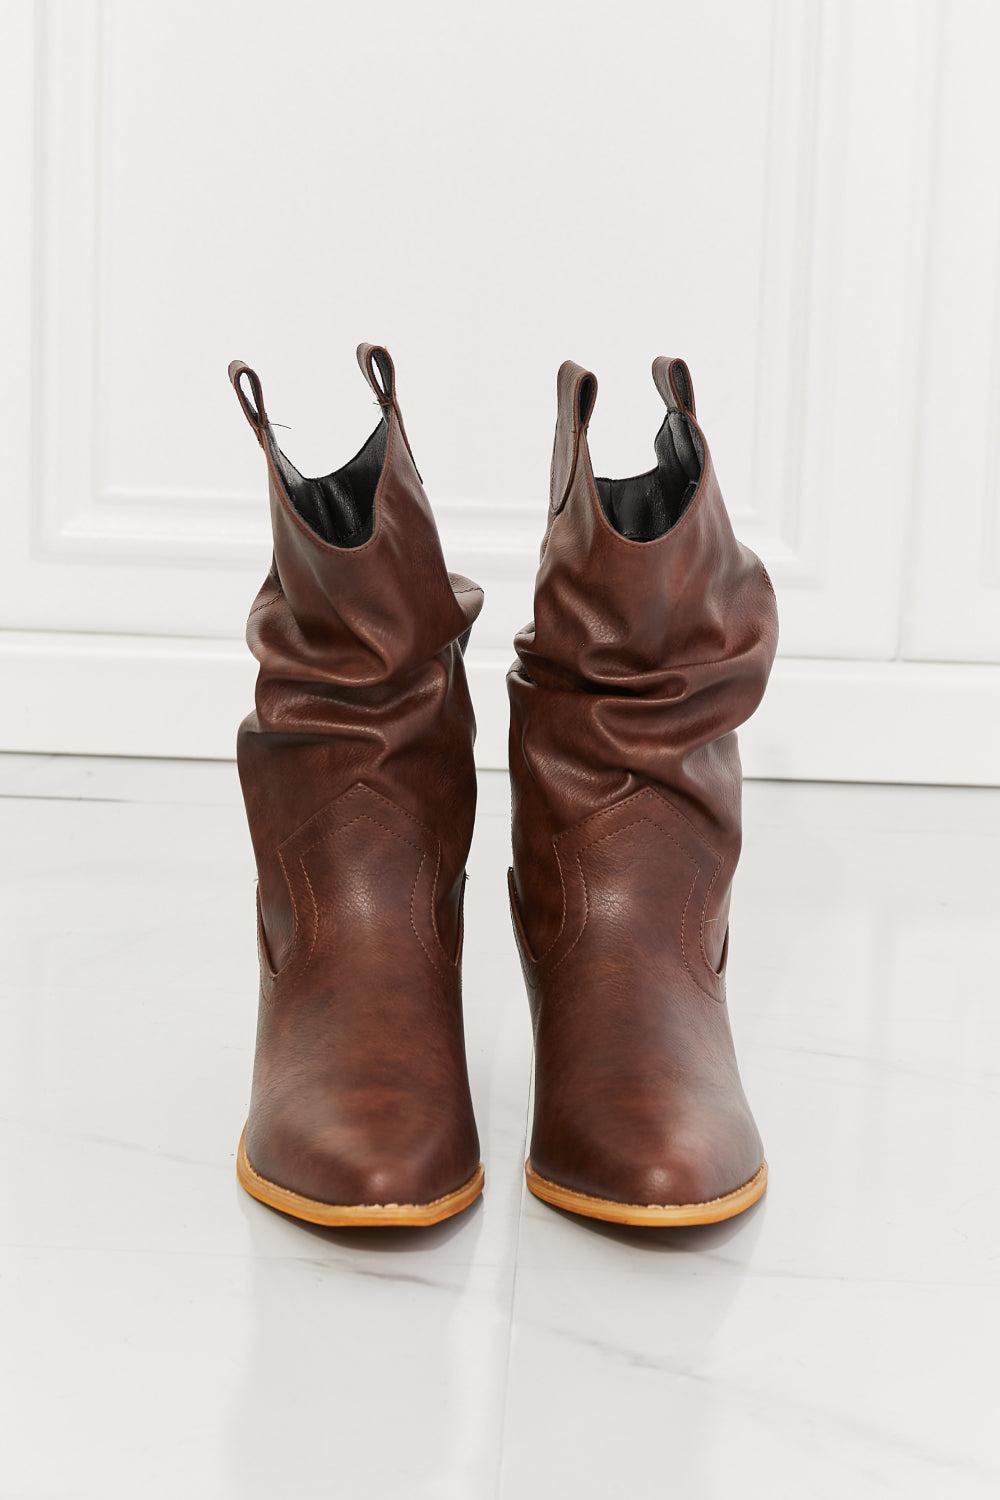 Better in Texas Scrunch Cowboy Boots in Brown - Copper + Rose